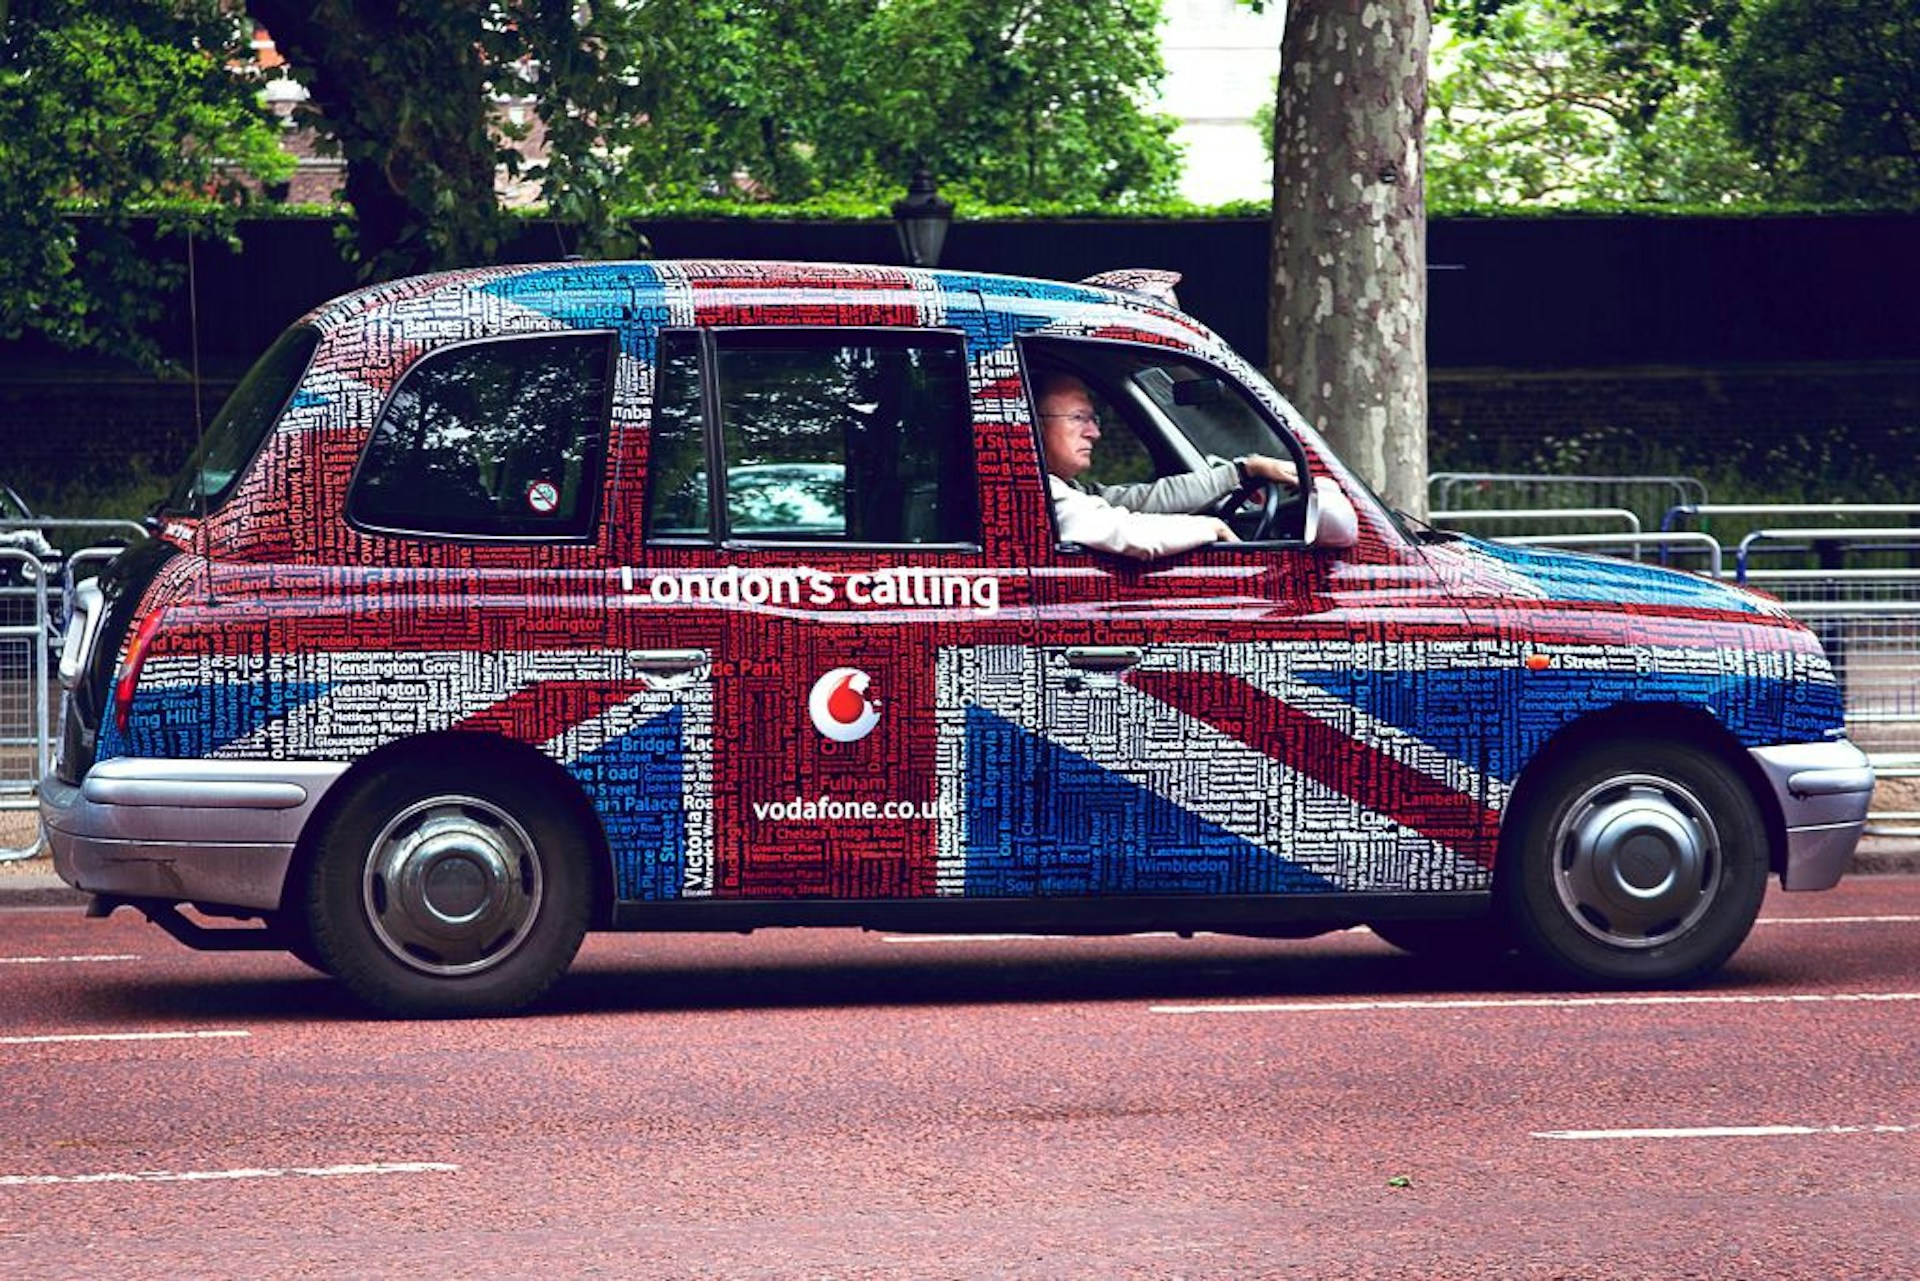 A London taxi cab painted with the British flag.